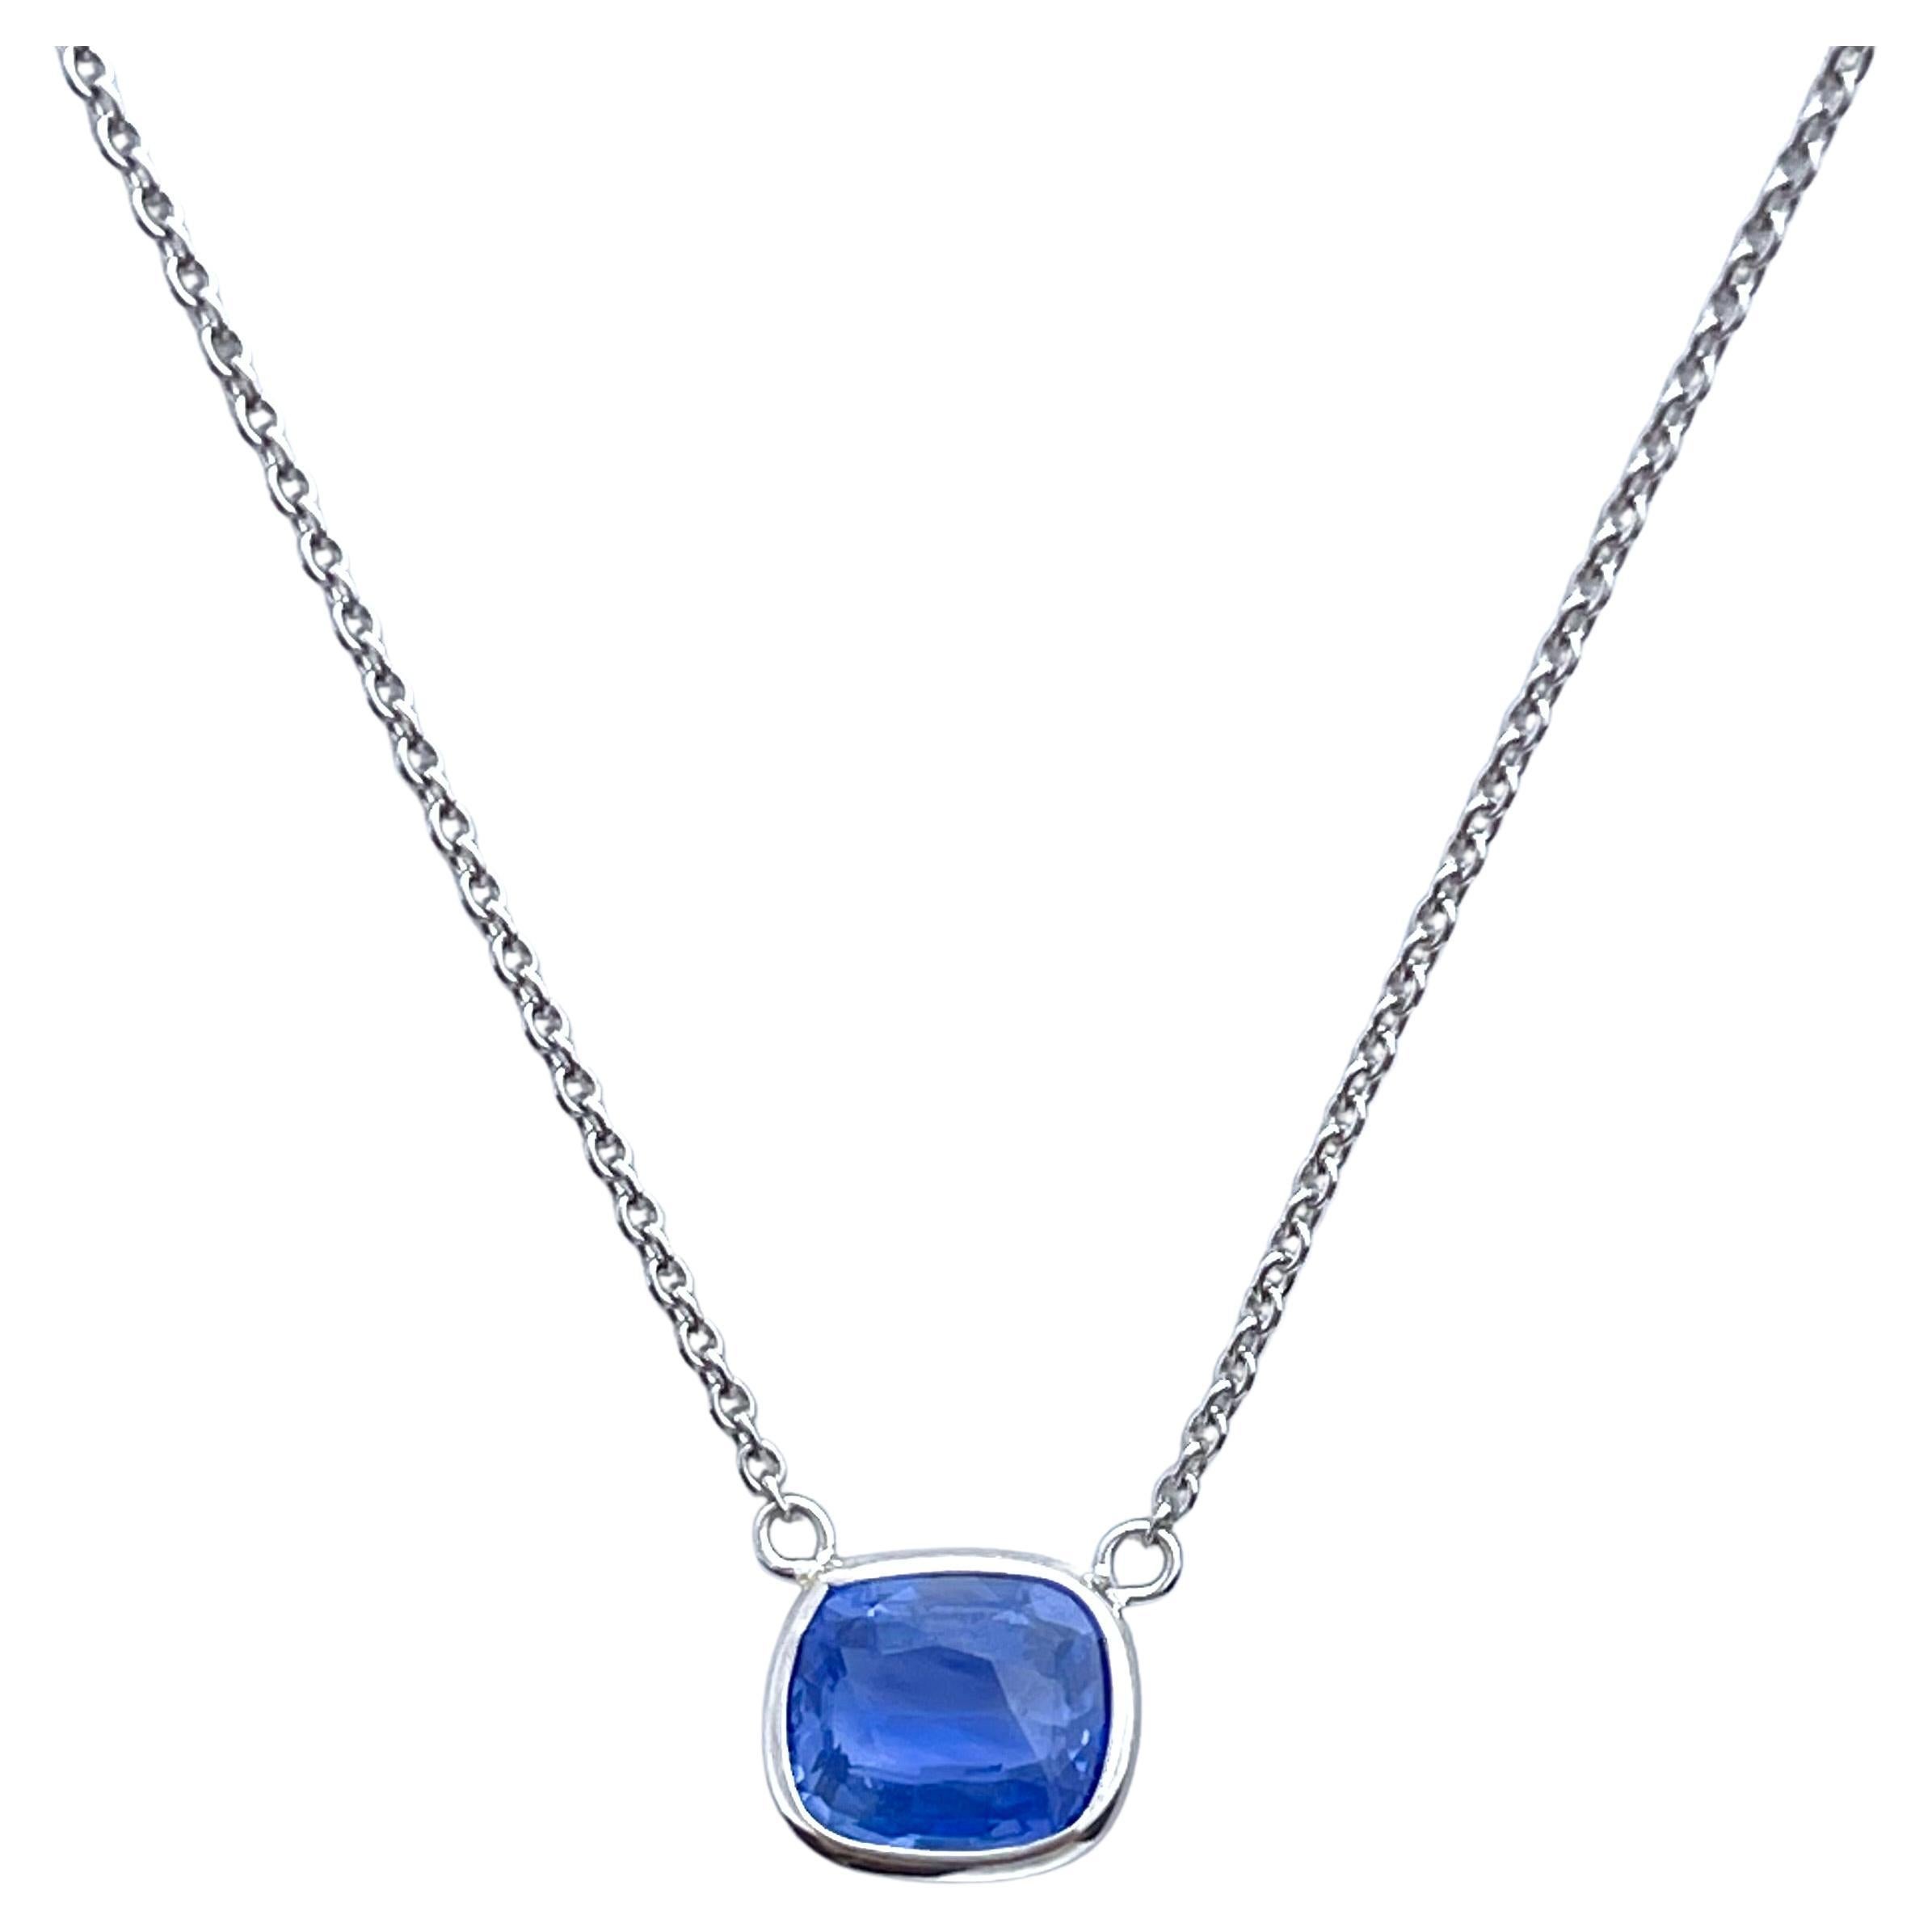 2.57ct Certified Blue Sapphire Cushion Cut Solitaire Necklace in 14k WG For Sale